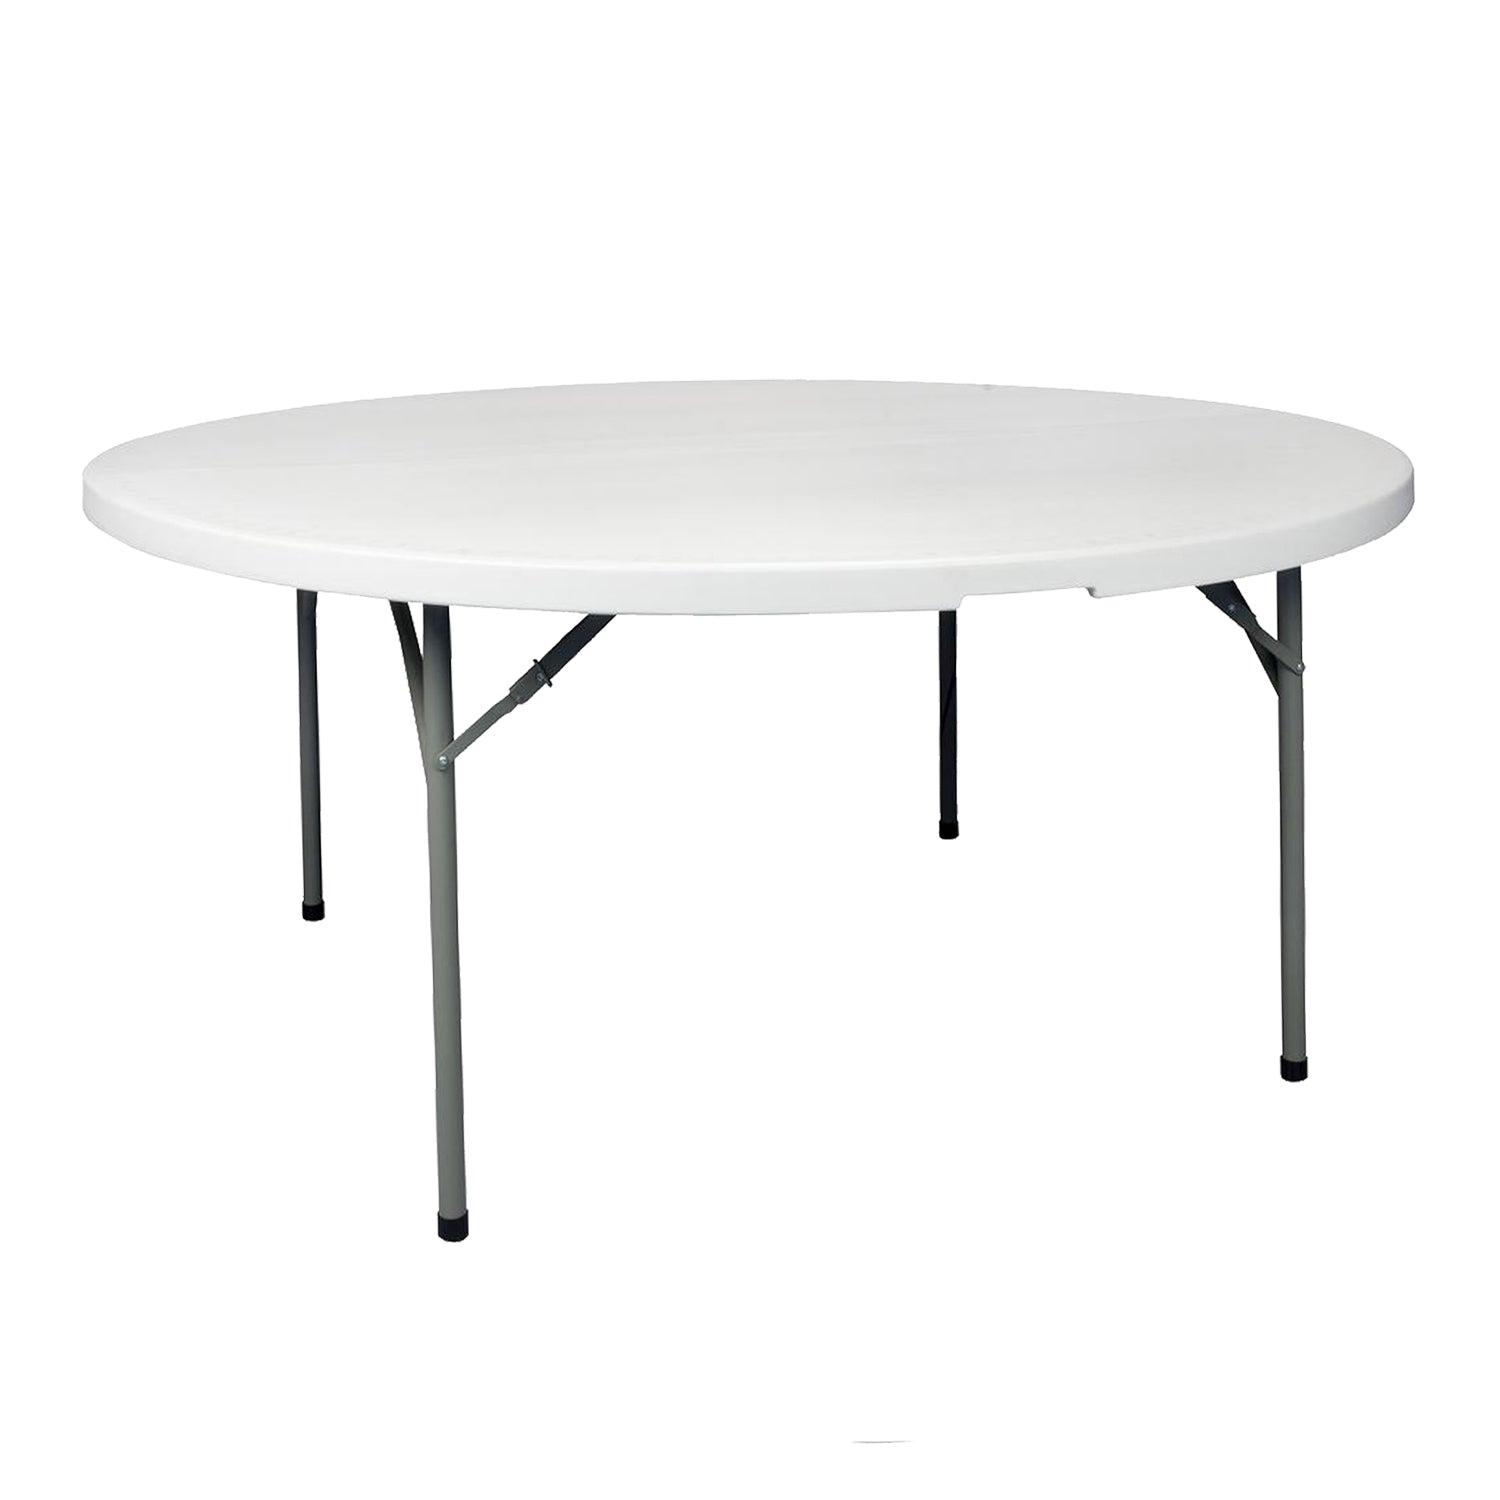 Totally Home Round Folding Plastic Table 1.5m - Trestle Table 8 to 10 Seater 44